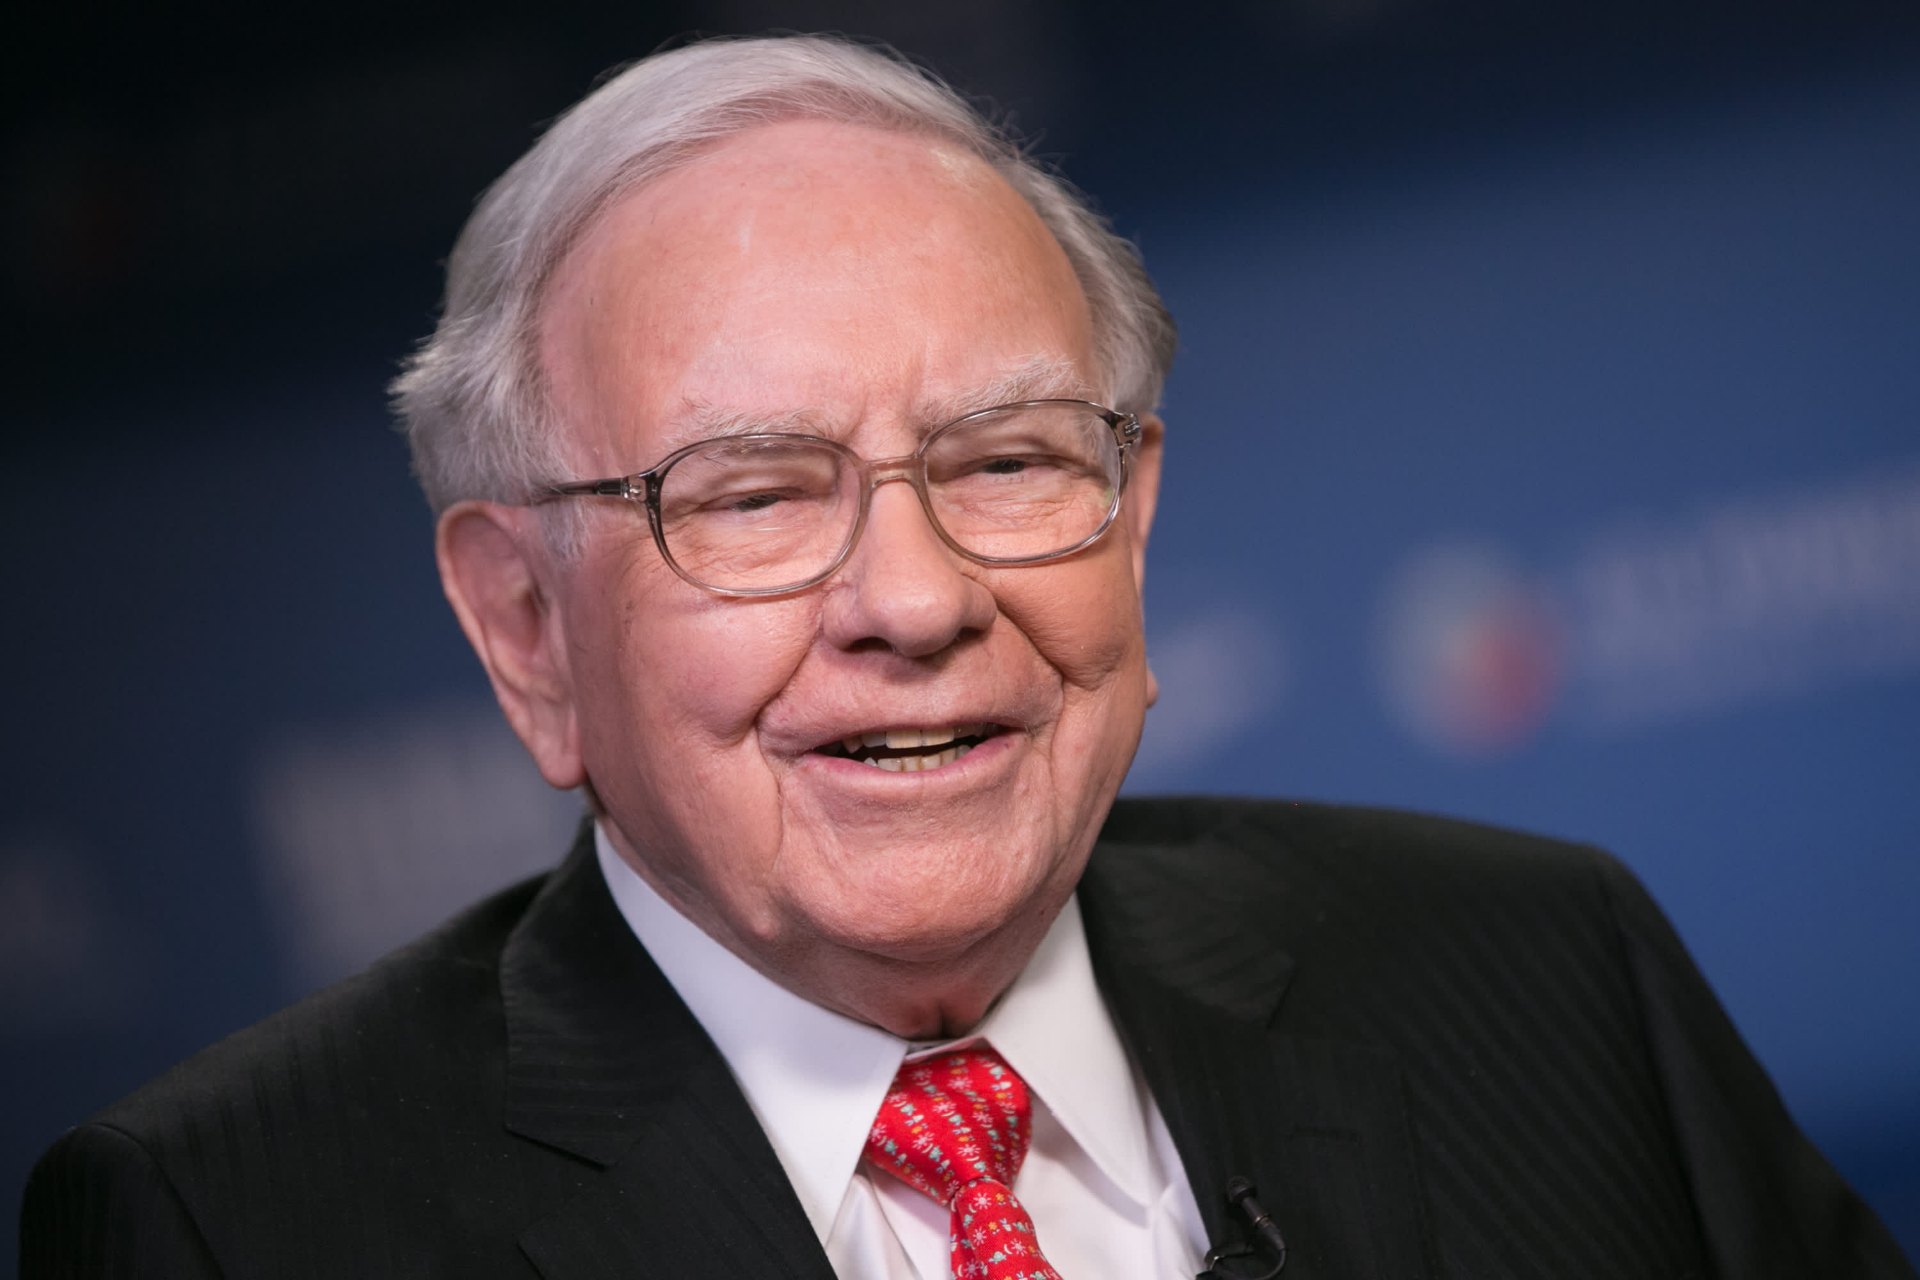 These Were the First Jobs of These 5 Billionaires